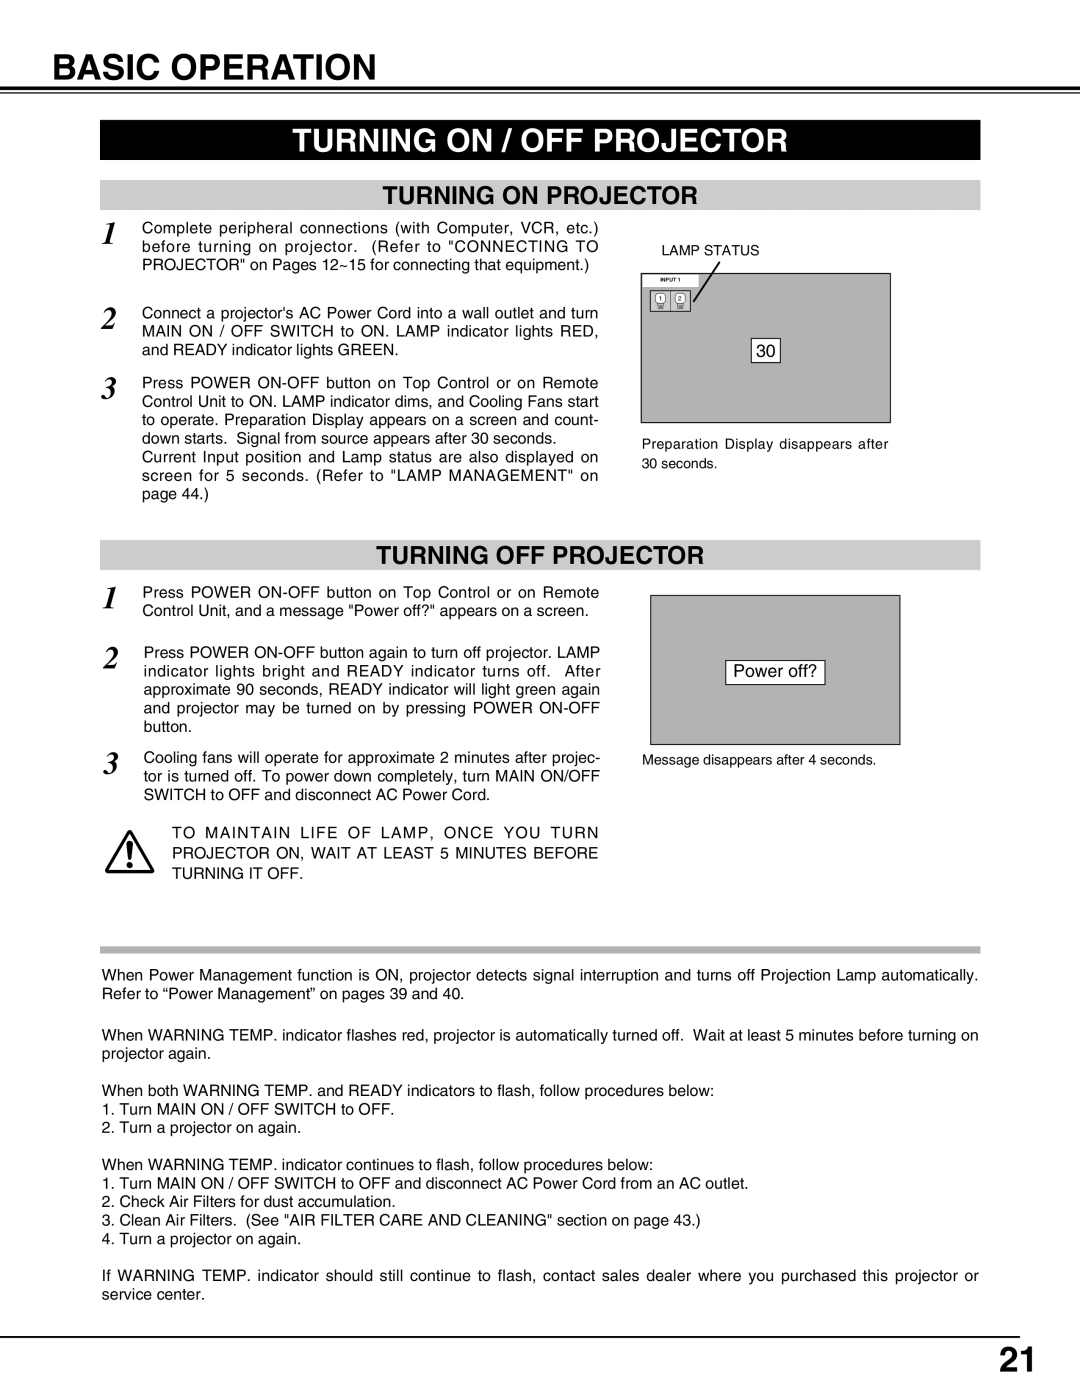 Christie Digital Systems 38-VIV302-01 user manual Basic Operation, Turning On / Off Projector, Turning On Projector 